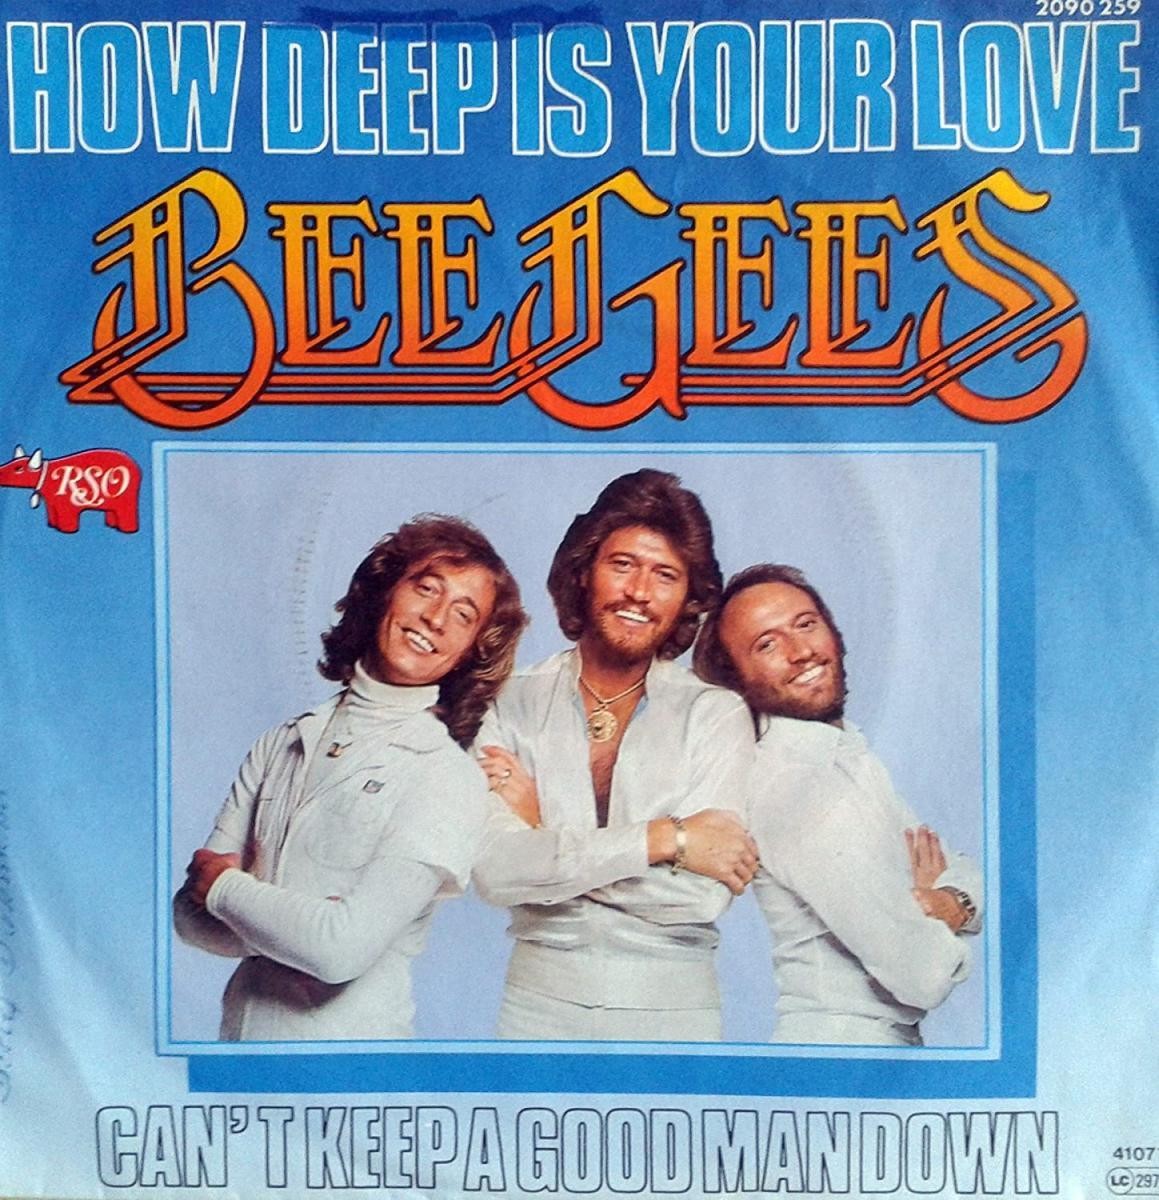 Bee Gees: How Deep Is Your Love (Music Video) (1977) - Filmaffinity